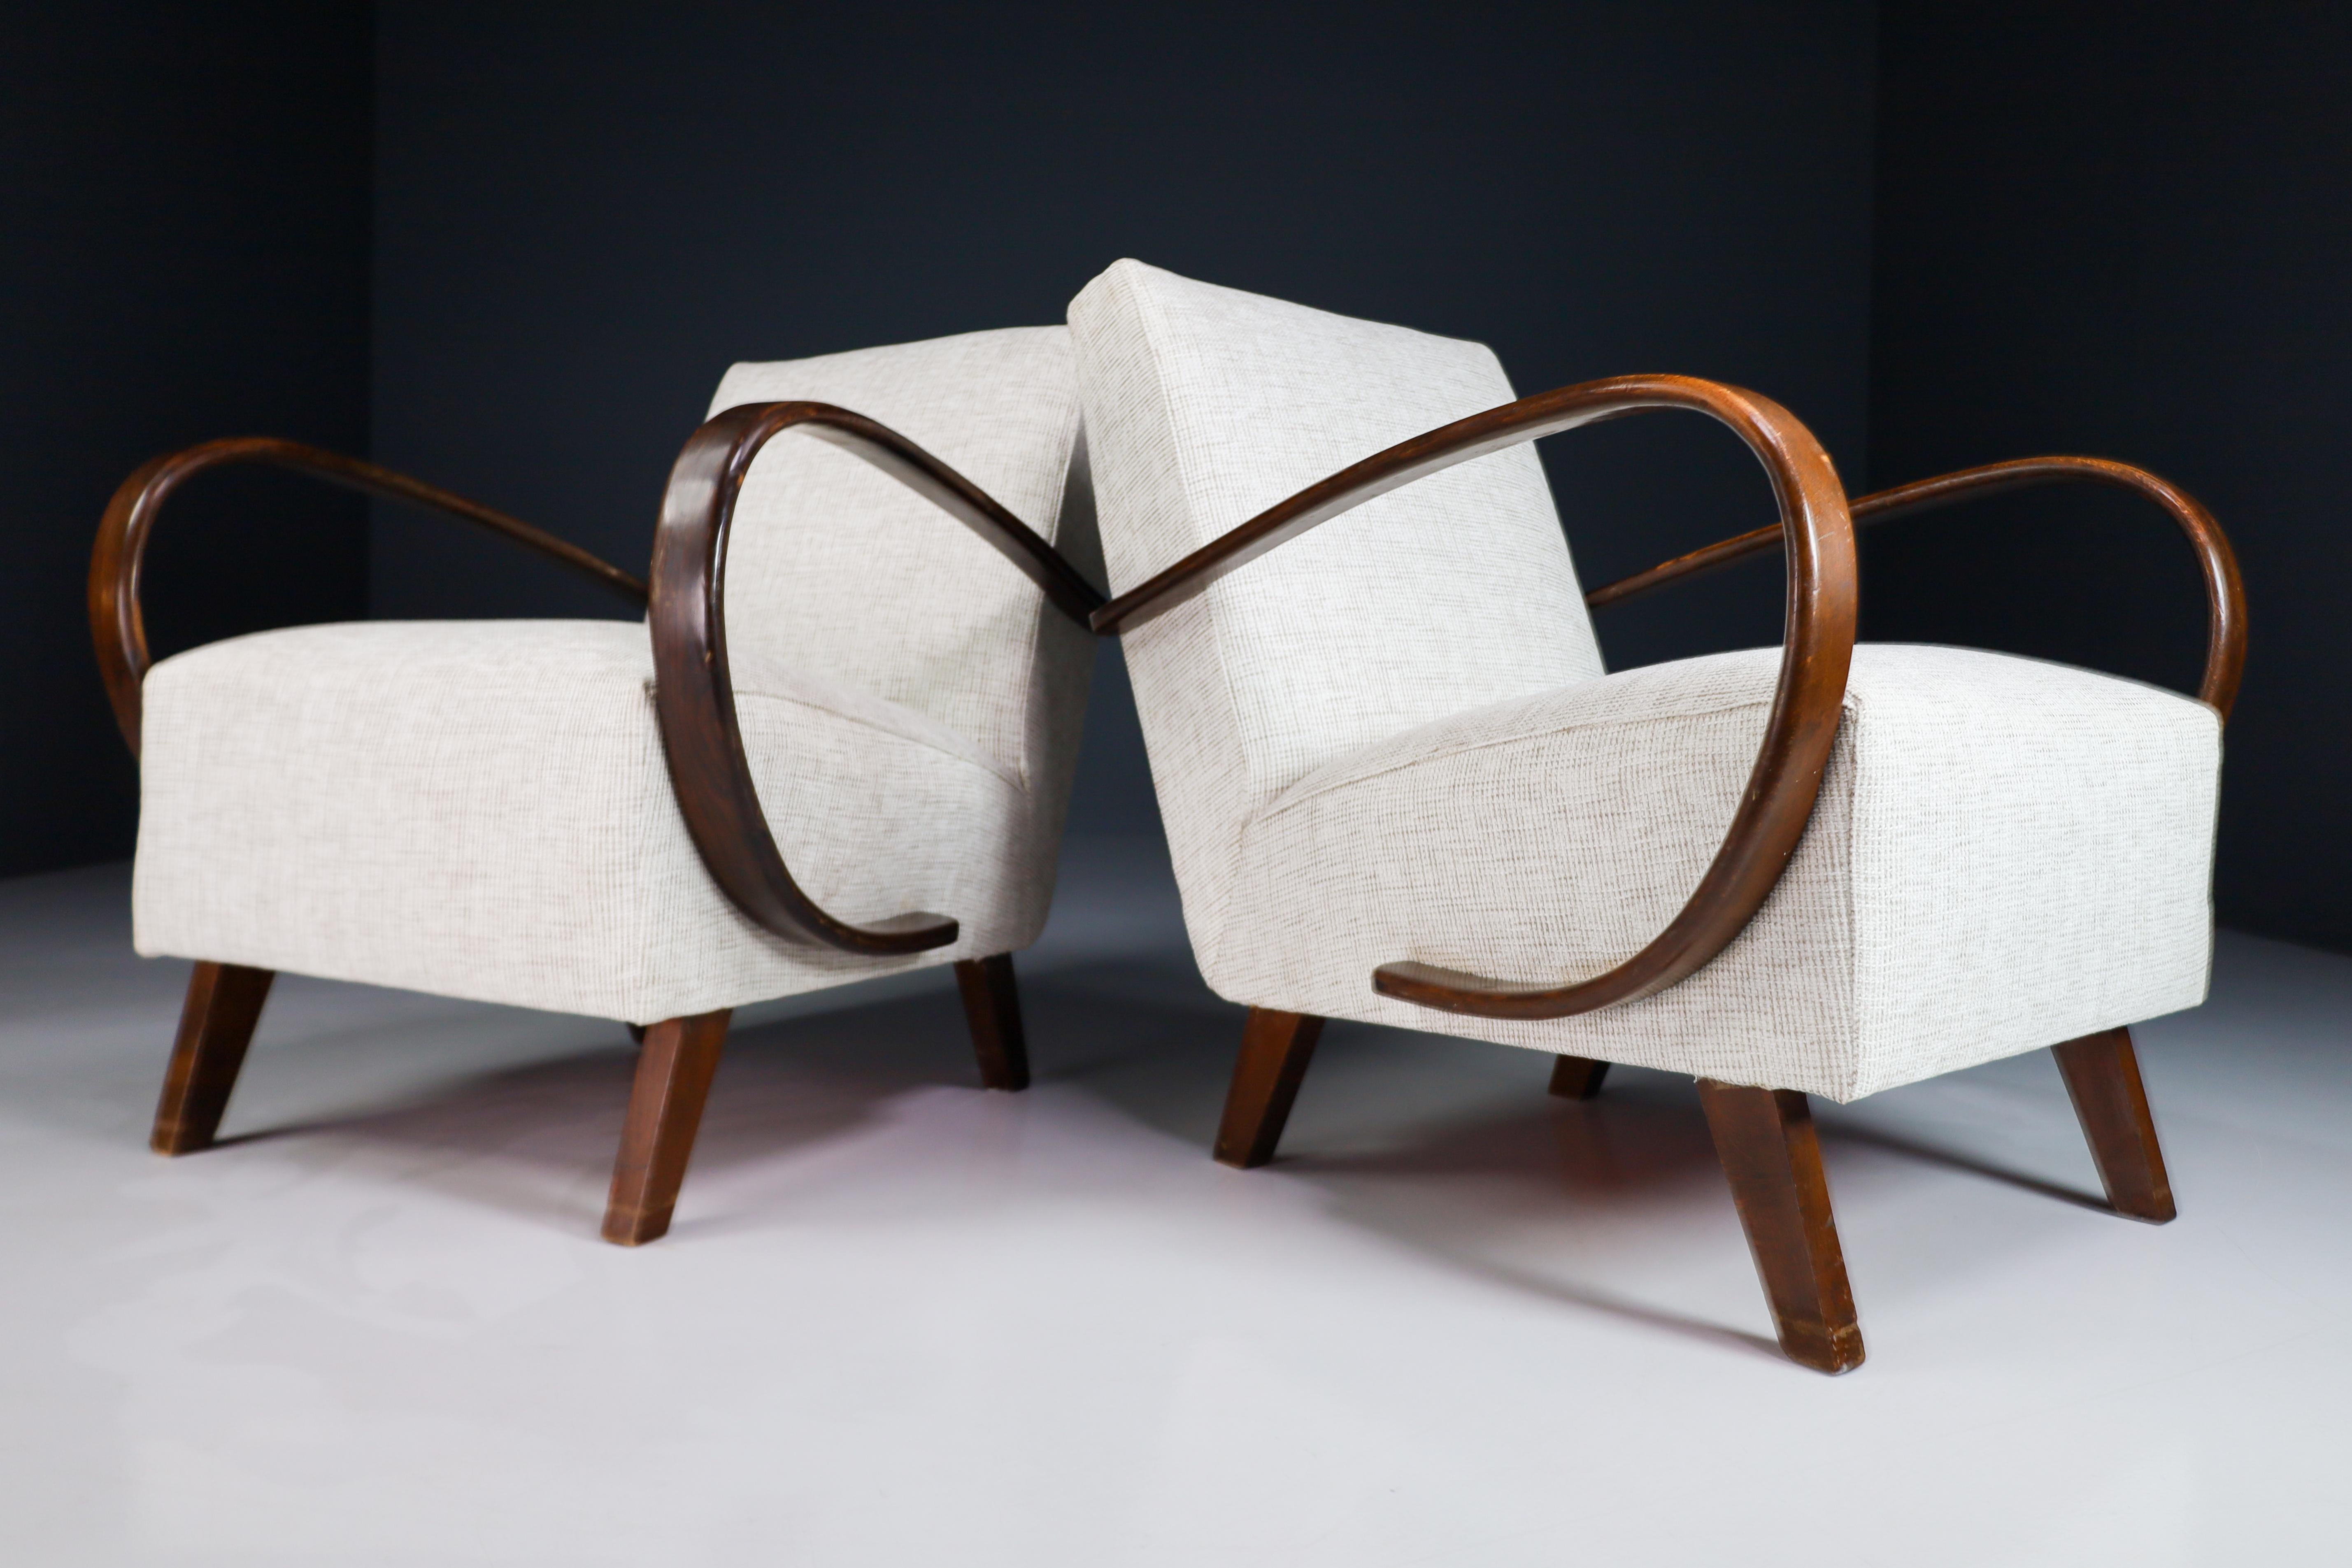 Art Deco Jindrich Halabala Re-Upholstered Bentwood armchairs, Praque 1940s 

These iconic set chairs from Czechia, circa 1940. Produced by Thonet, these chairs (model H-227) designed by Jindrich Halabala, are a benchmark for midcentury design in